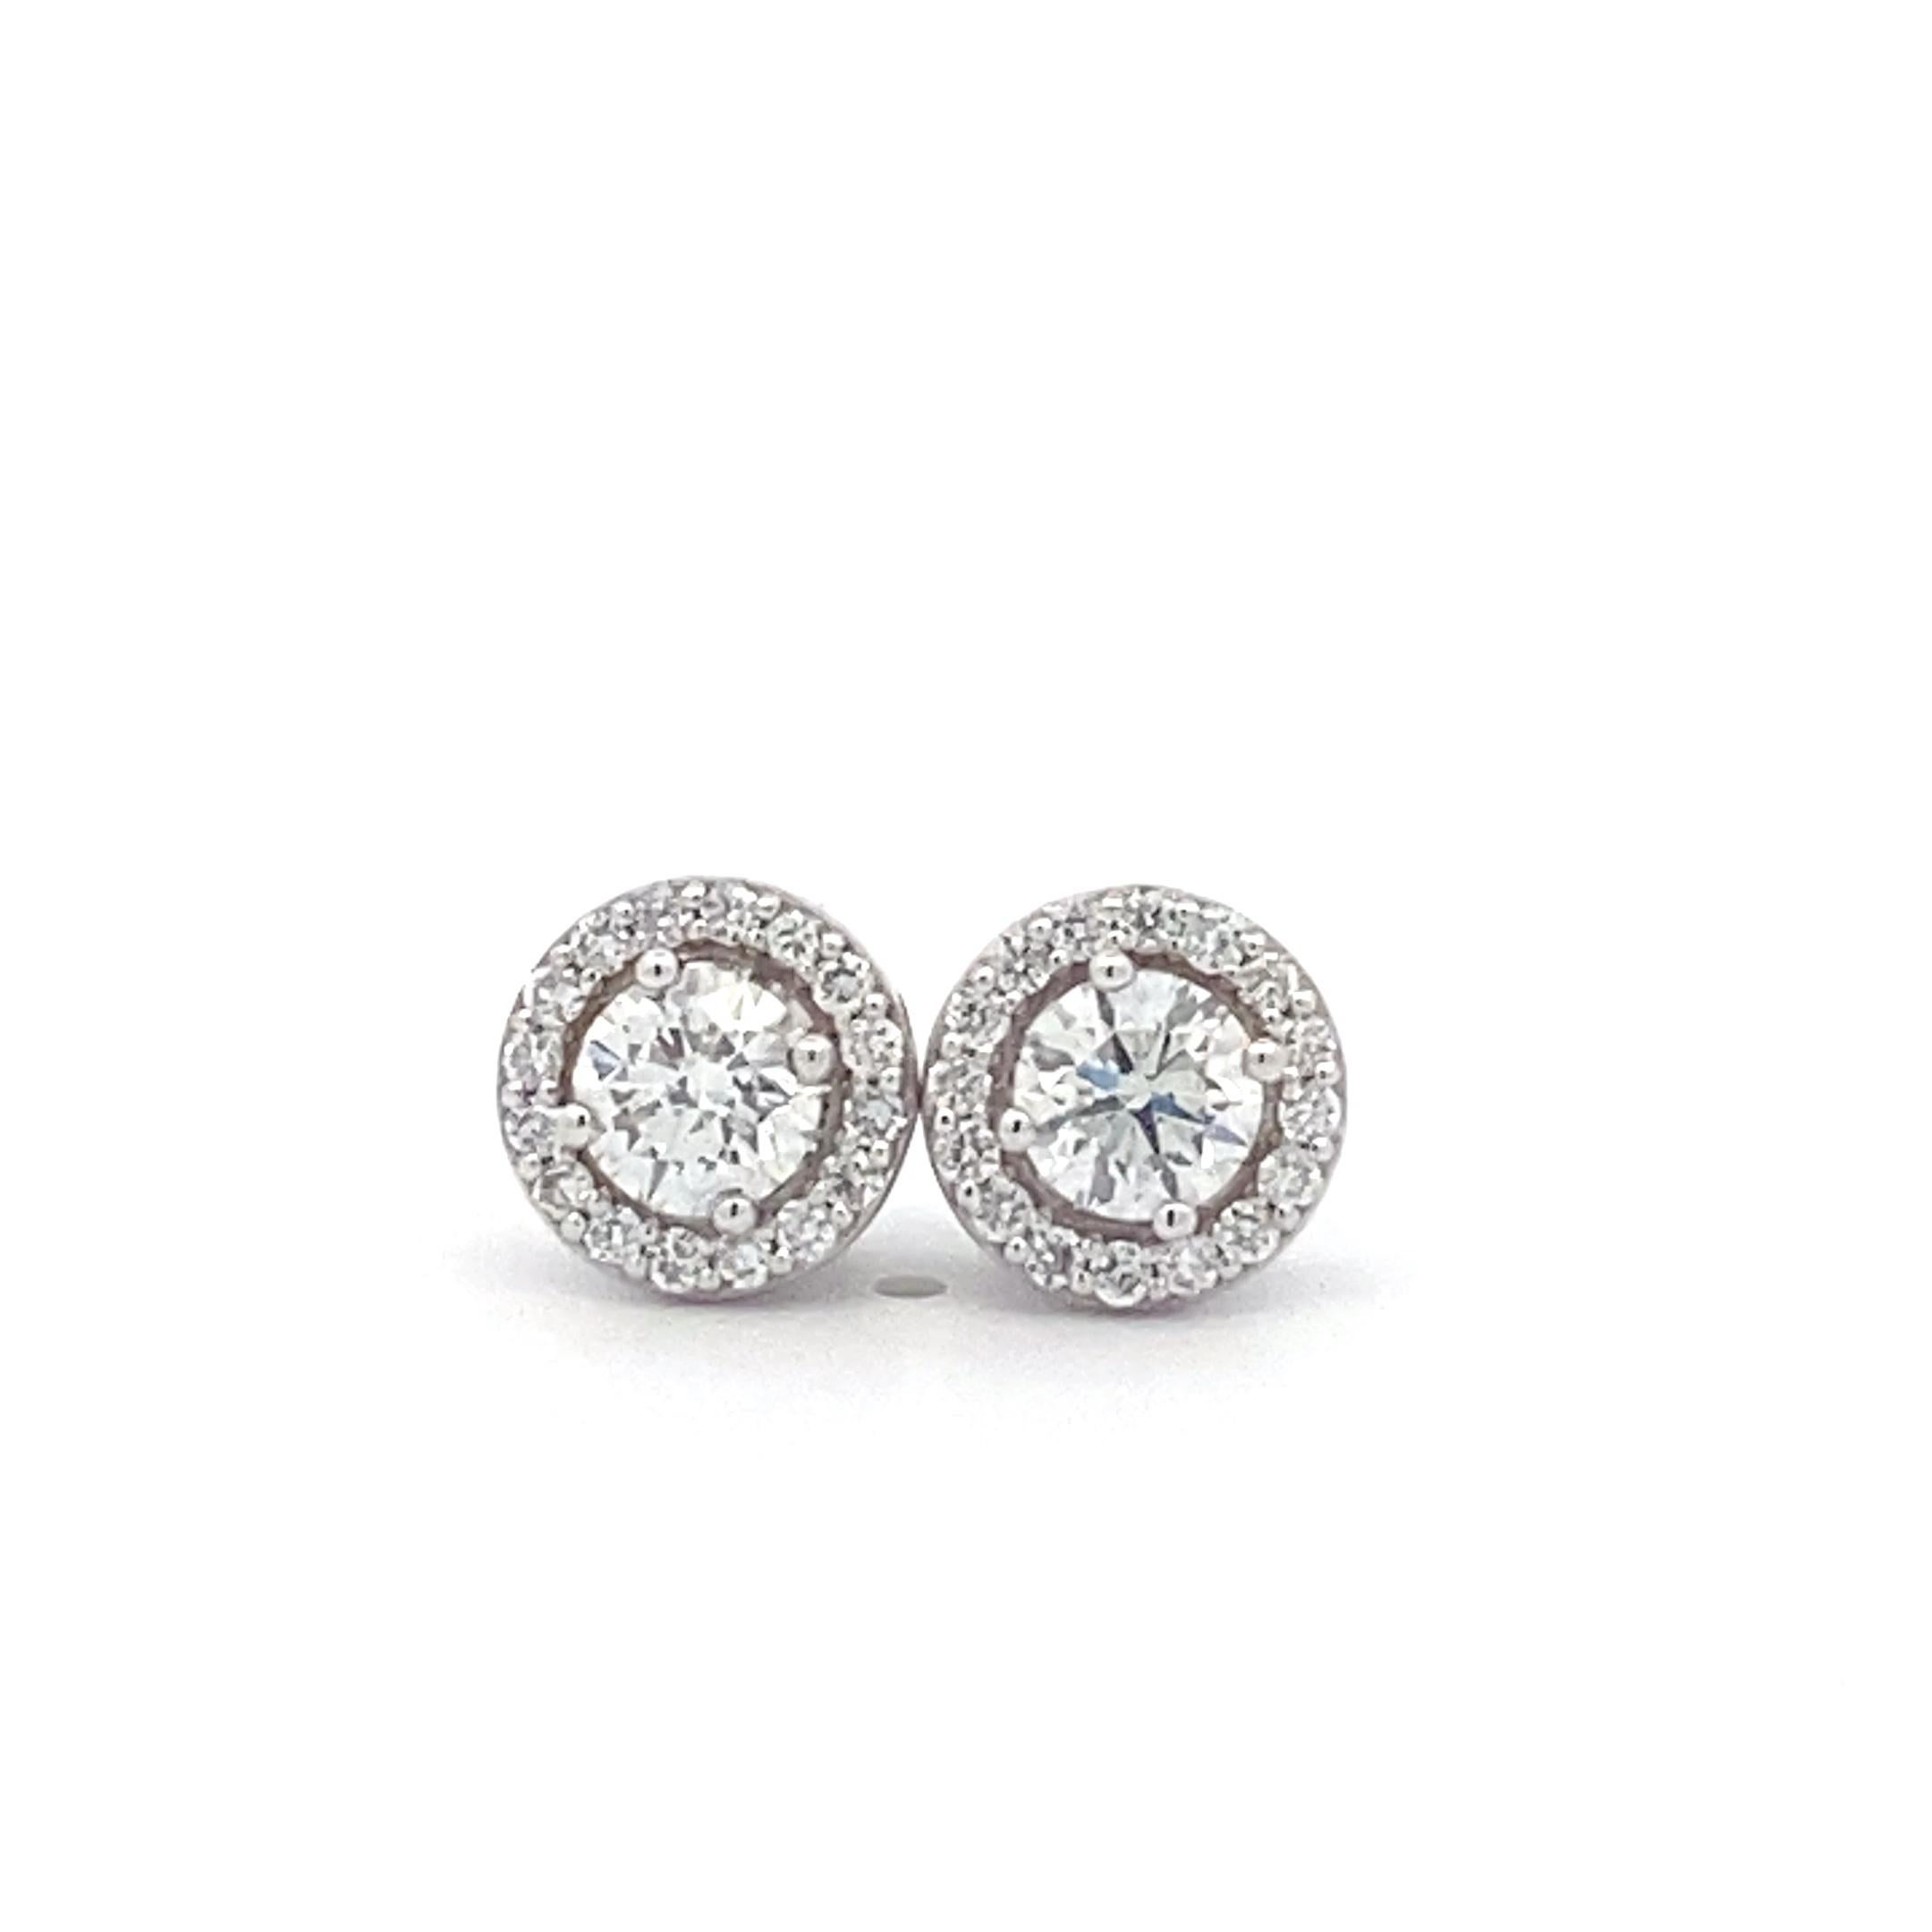 Introducing the stunning IGI 18k White Gold Interchangeable Hoop Earrings, a luxurious and versatile accessory that embodies elegance and glamour. Each earring showcases a dazzling 1-carat center round diamond, radiating brilliance and